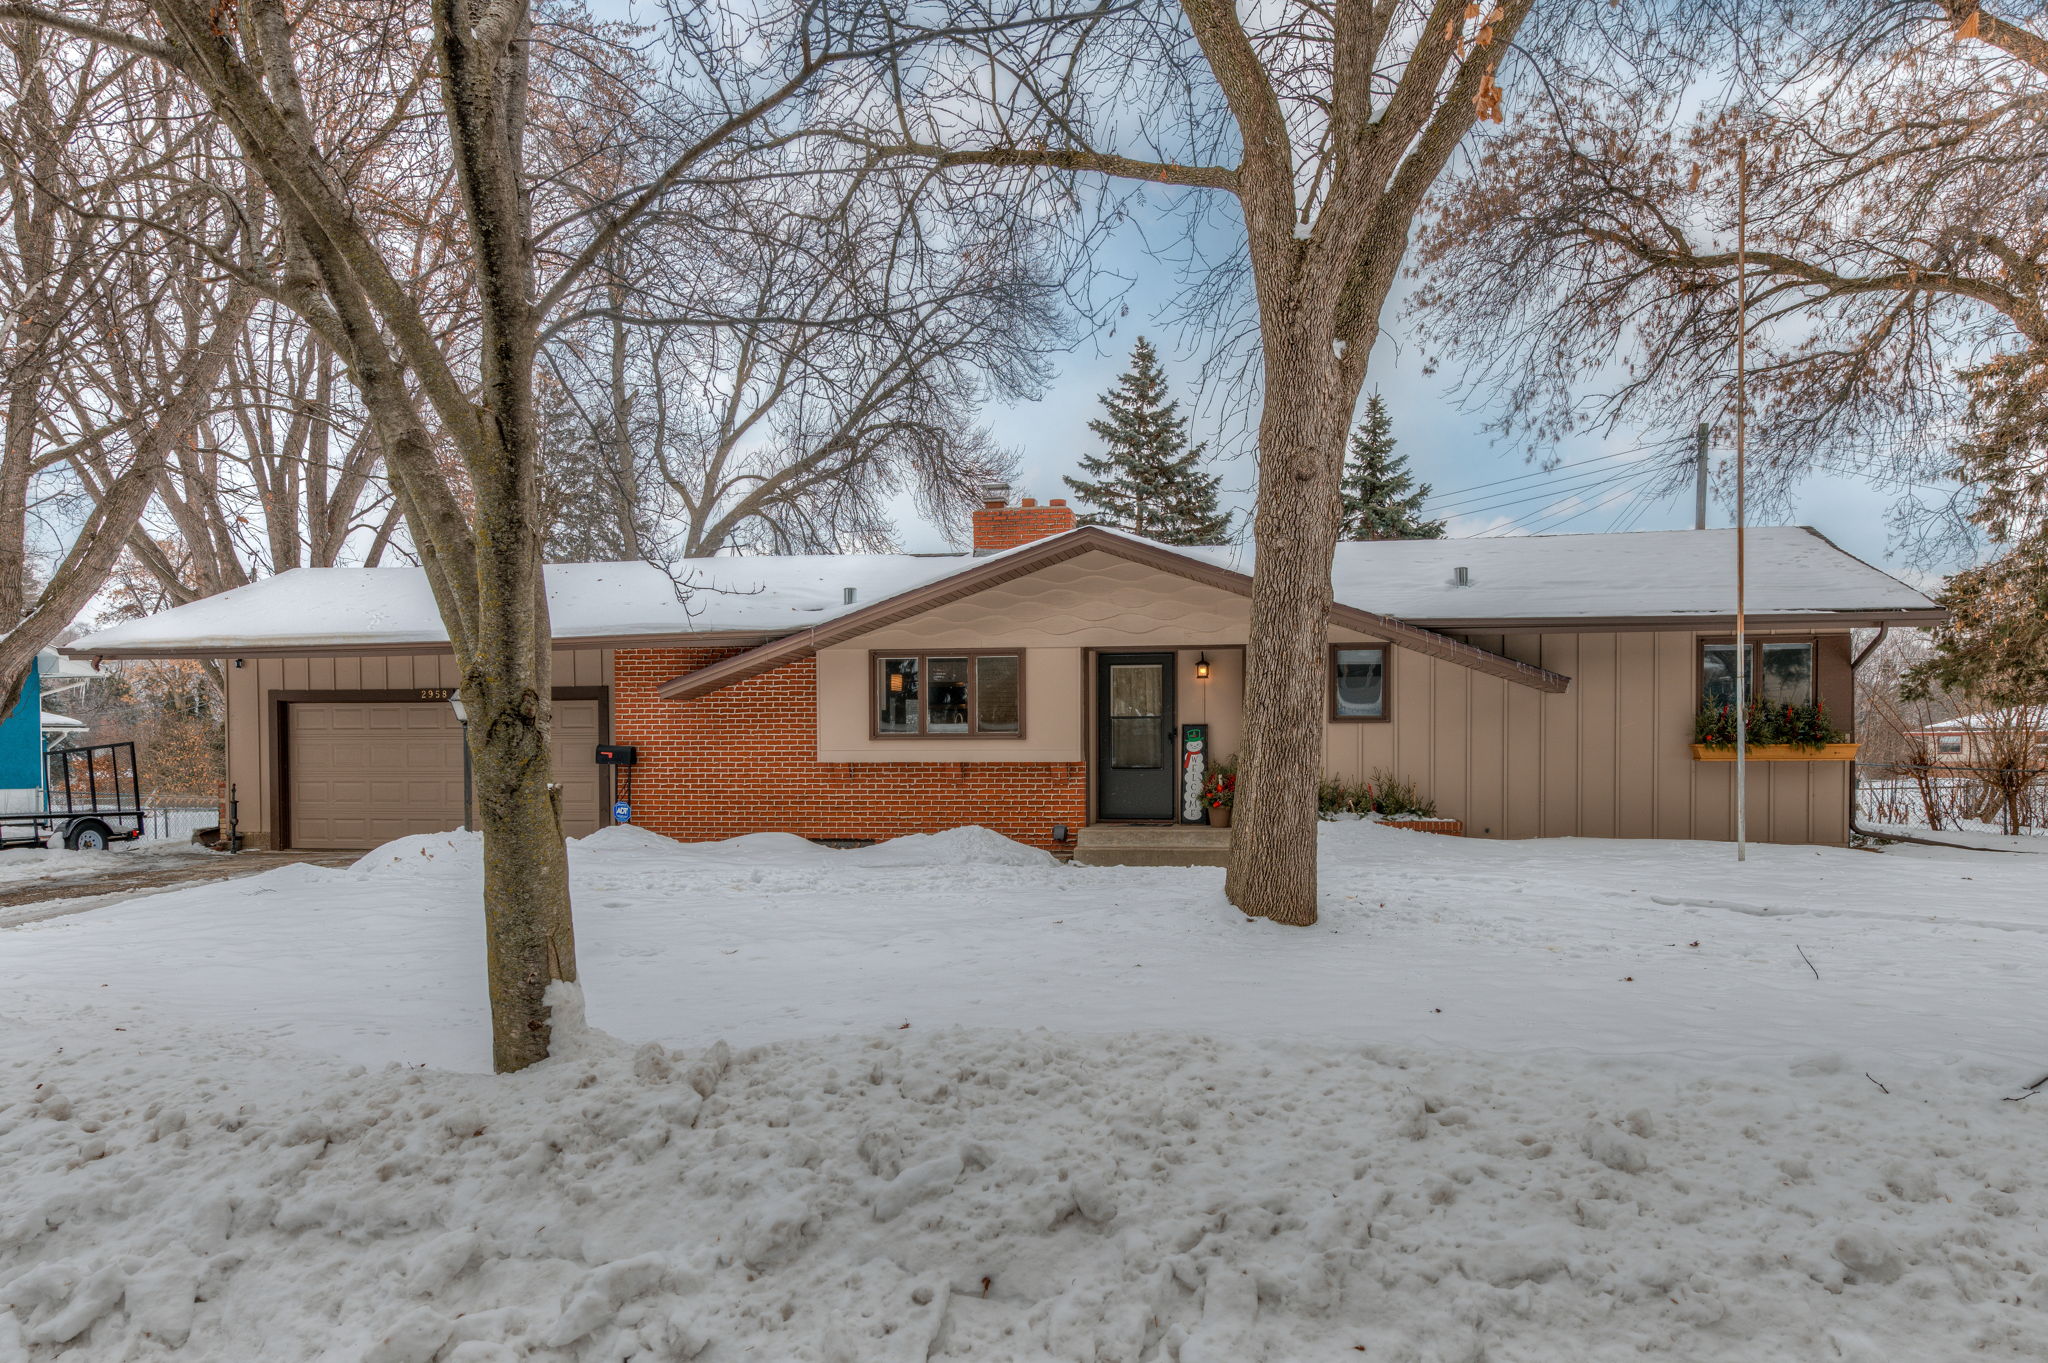  2958 Patton Rd, Shoreview, MN 55113, US